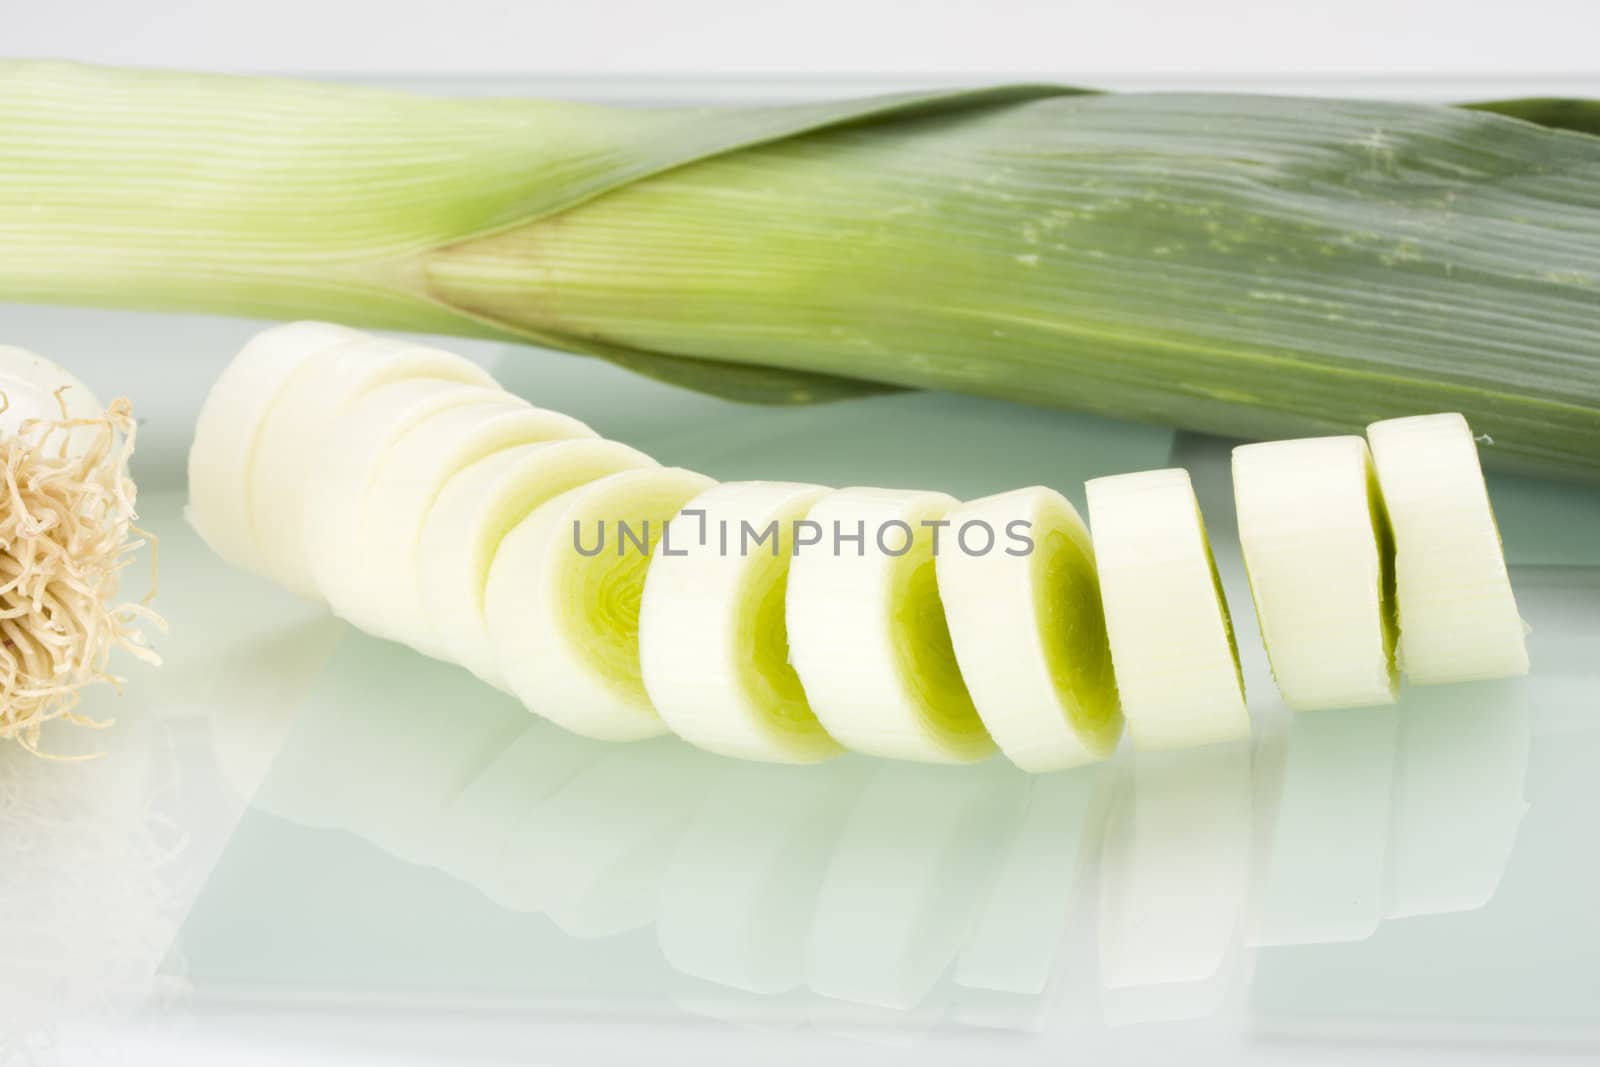 slices of leek on a glass chopping board by bernjuer